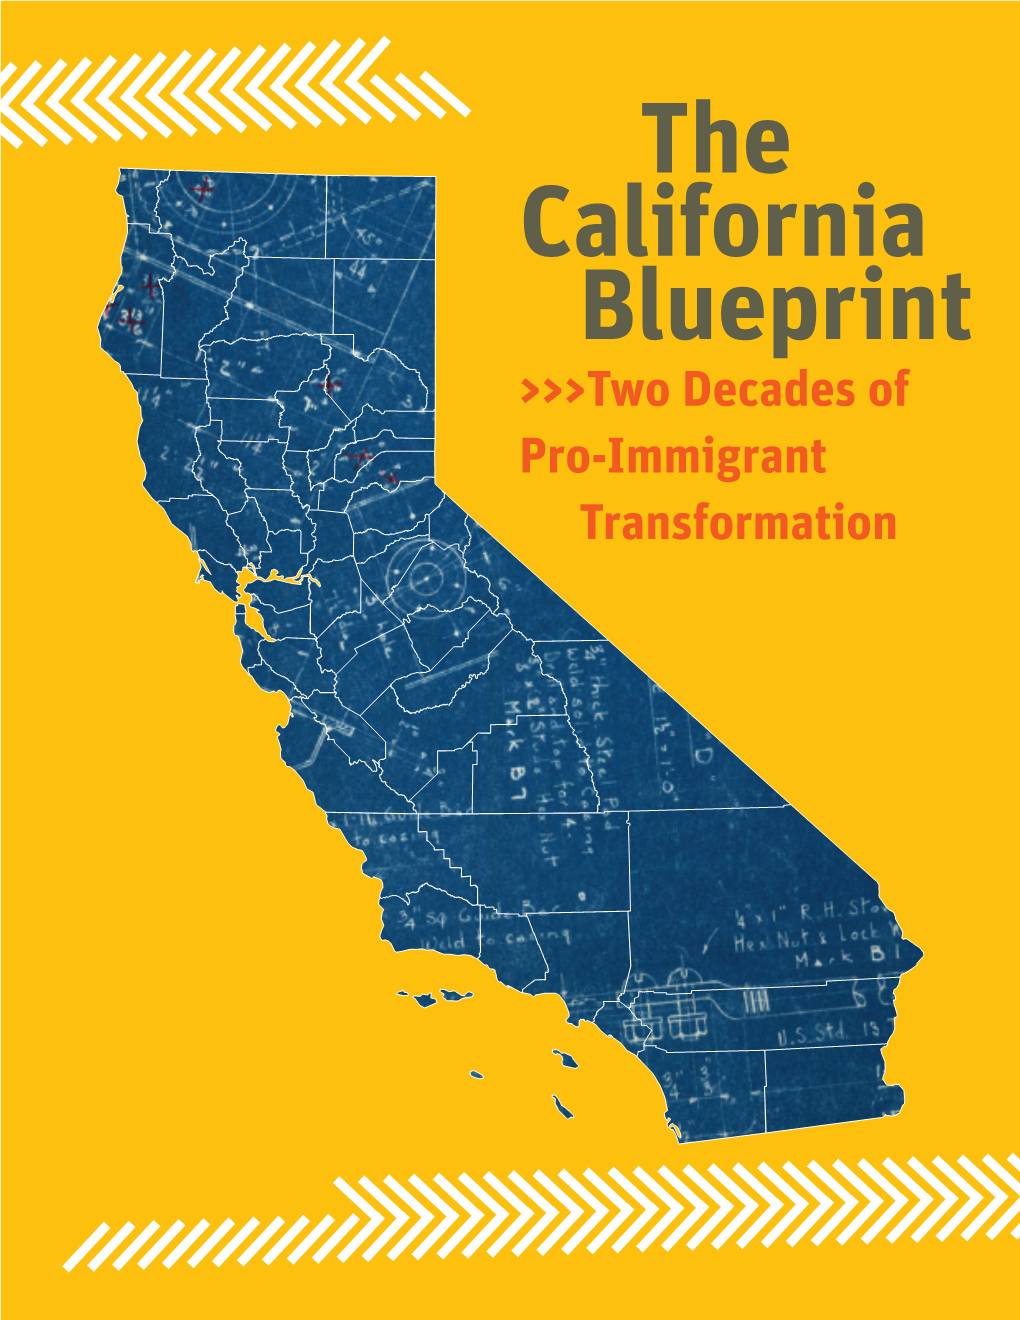 The California Blueprint >>>Two Decades of Pro-Immigrant Transformation “Just As California’S Changed, Arizona’S Going to Change